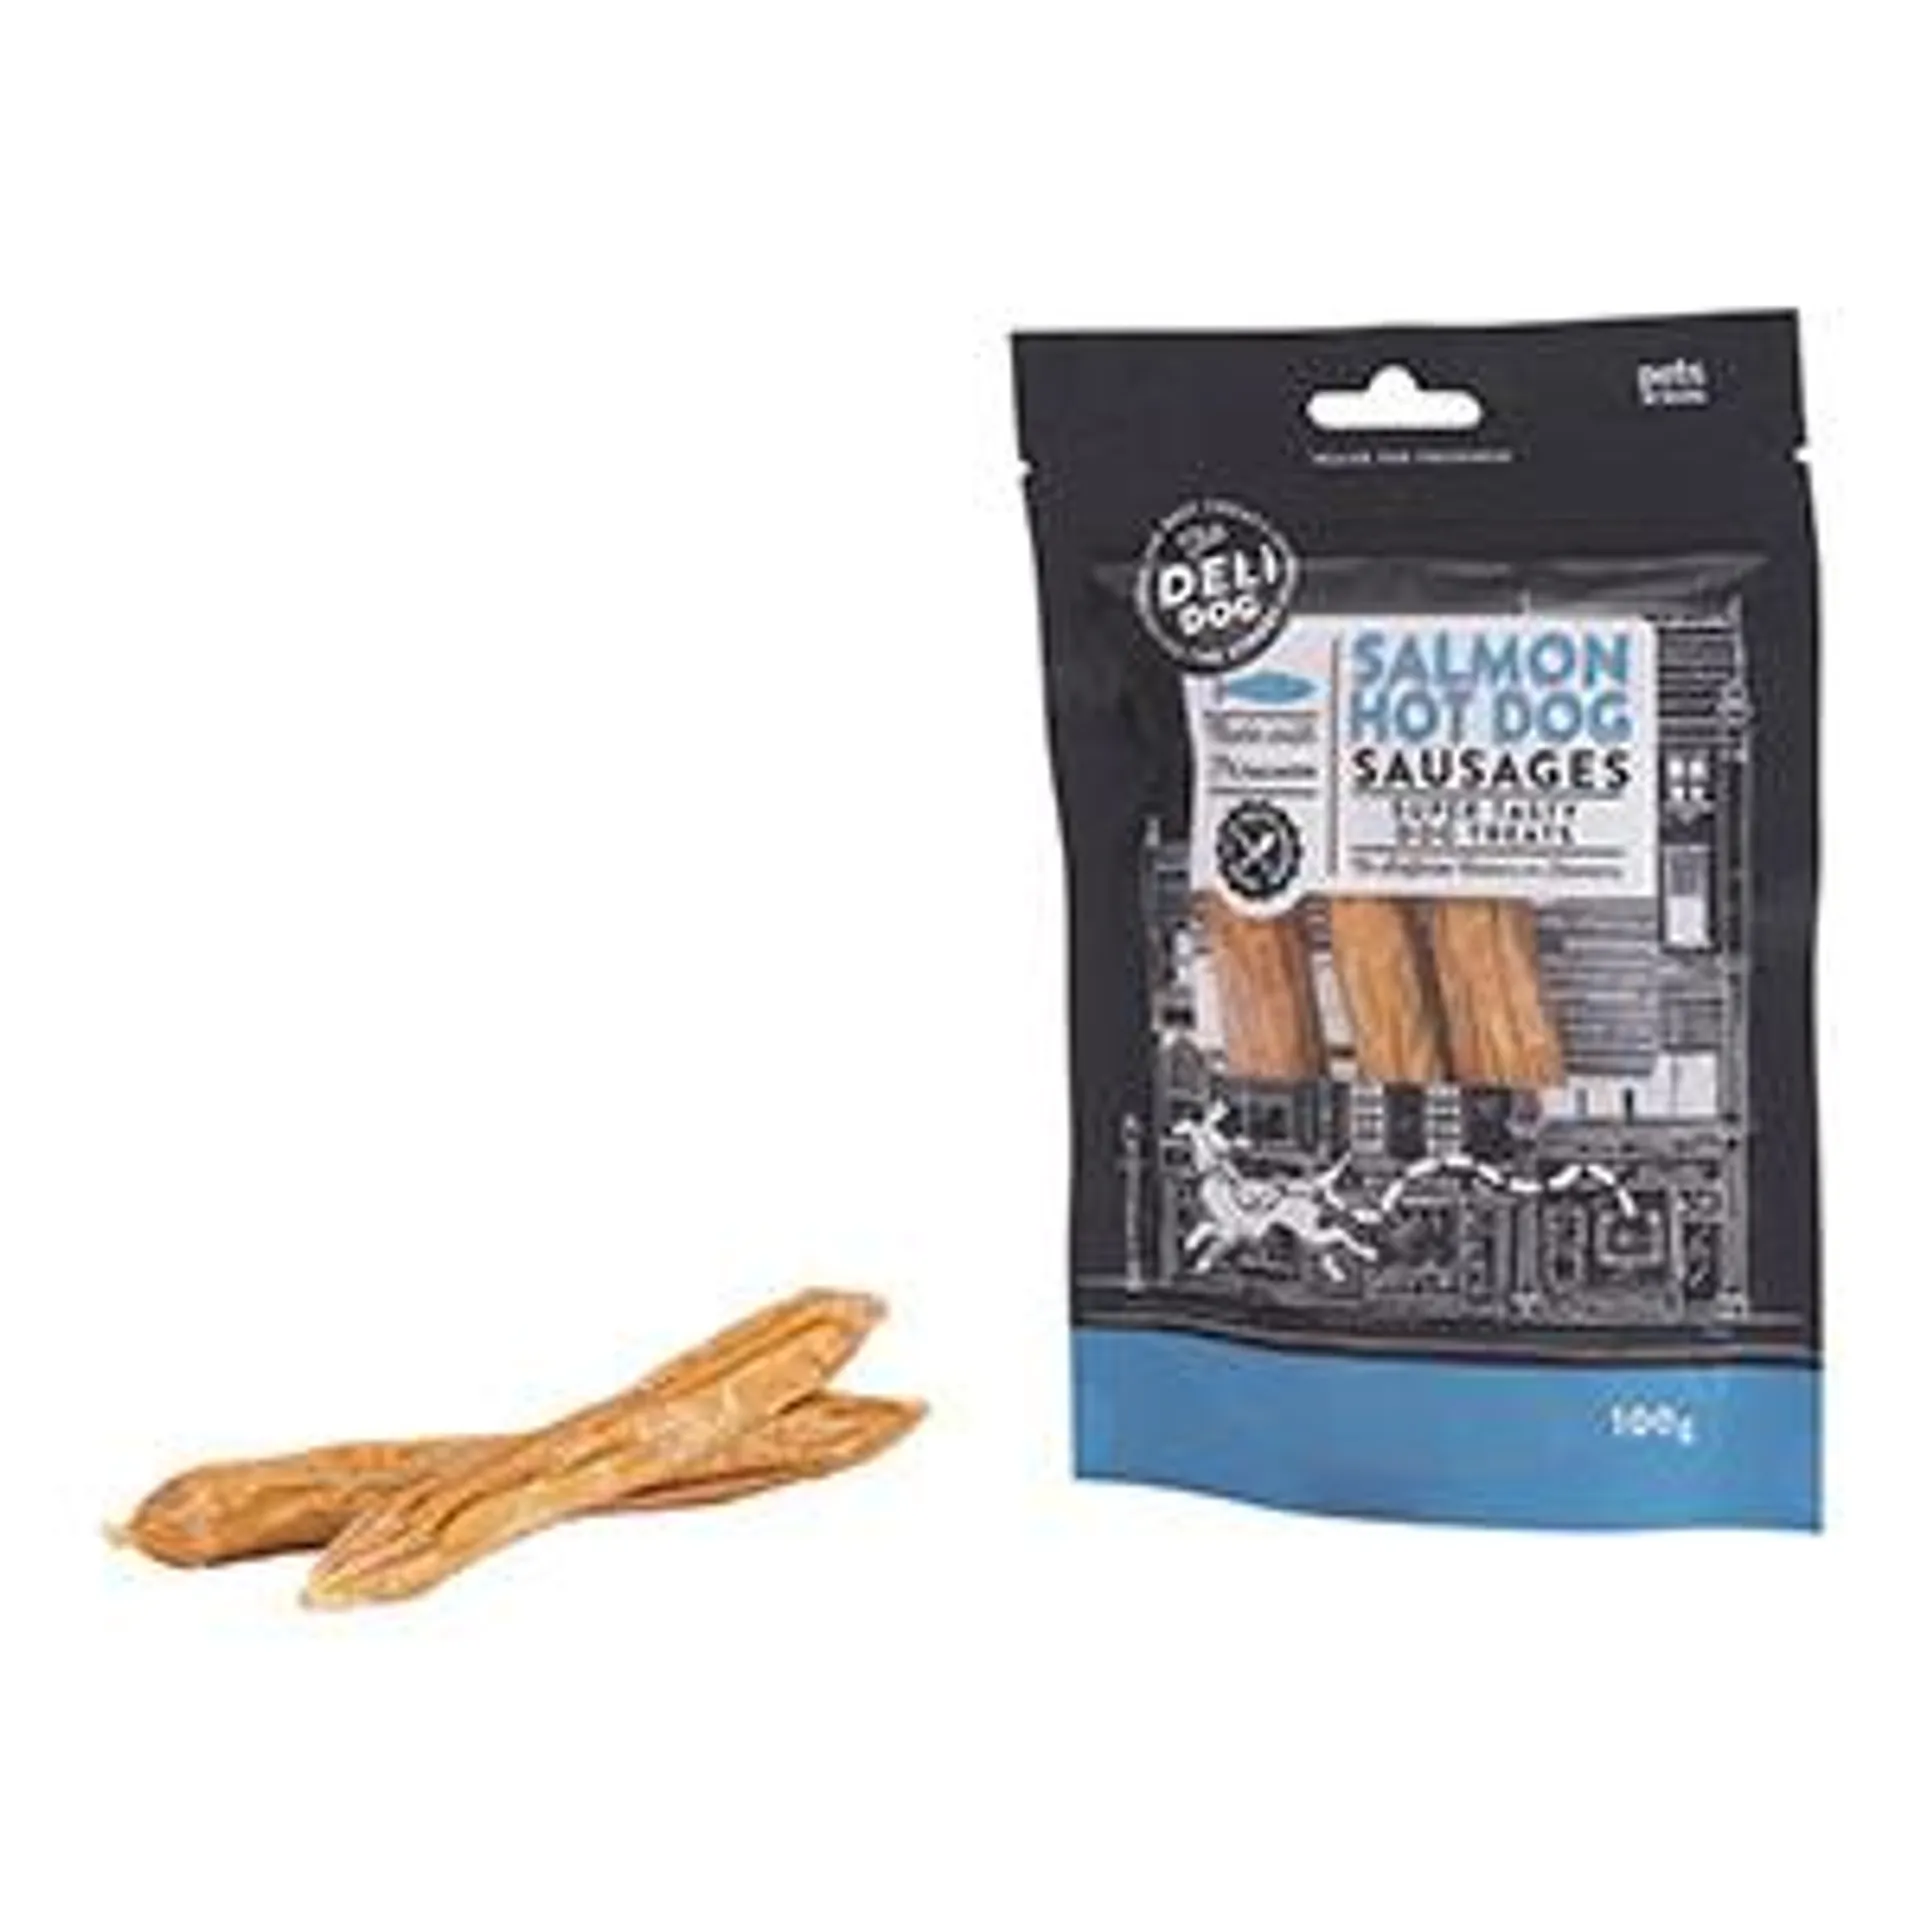 Pets at Home The Deli Dog Salmon Hot Adult Dog Meaty Treats 100g